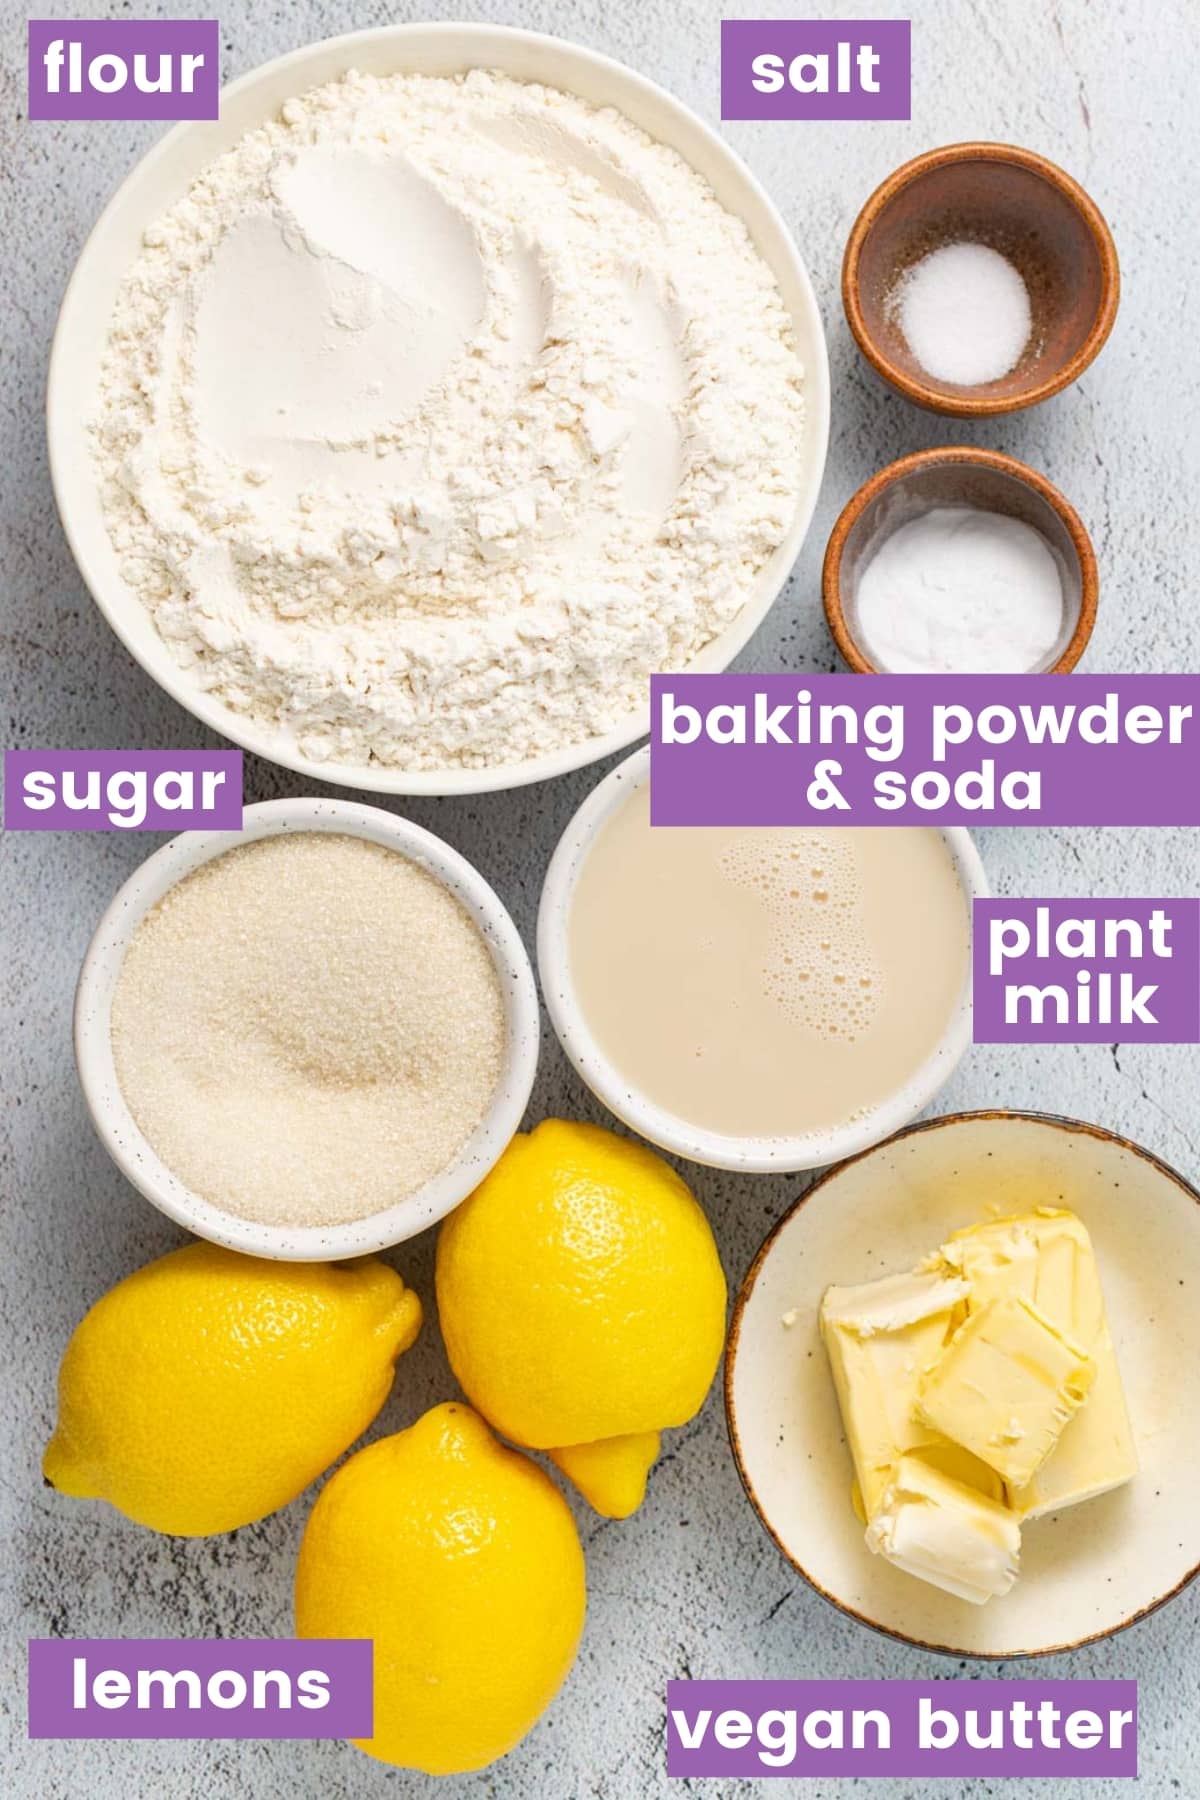 ingredients for lemon muffins as per the written list 